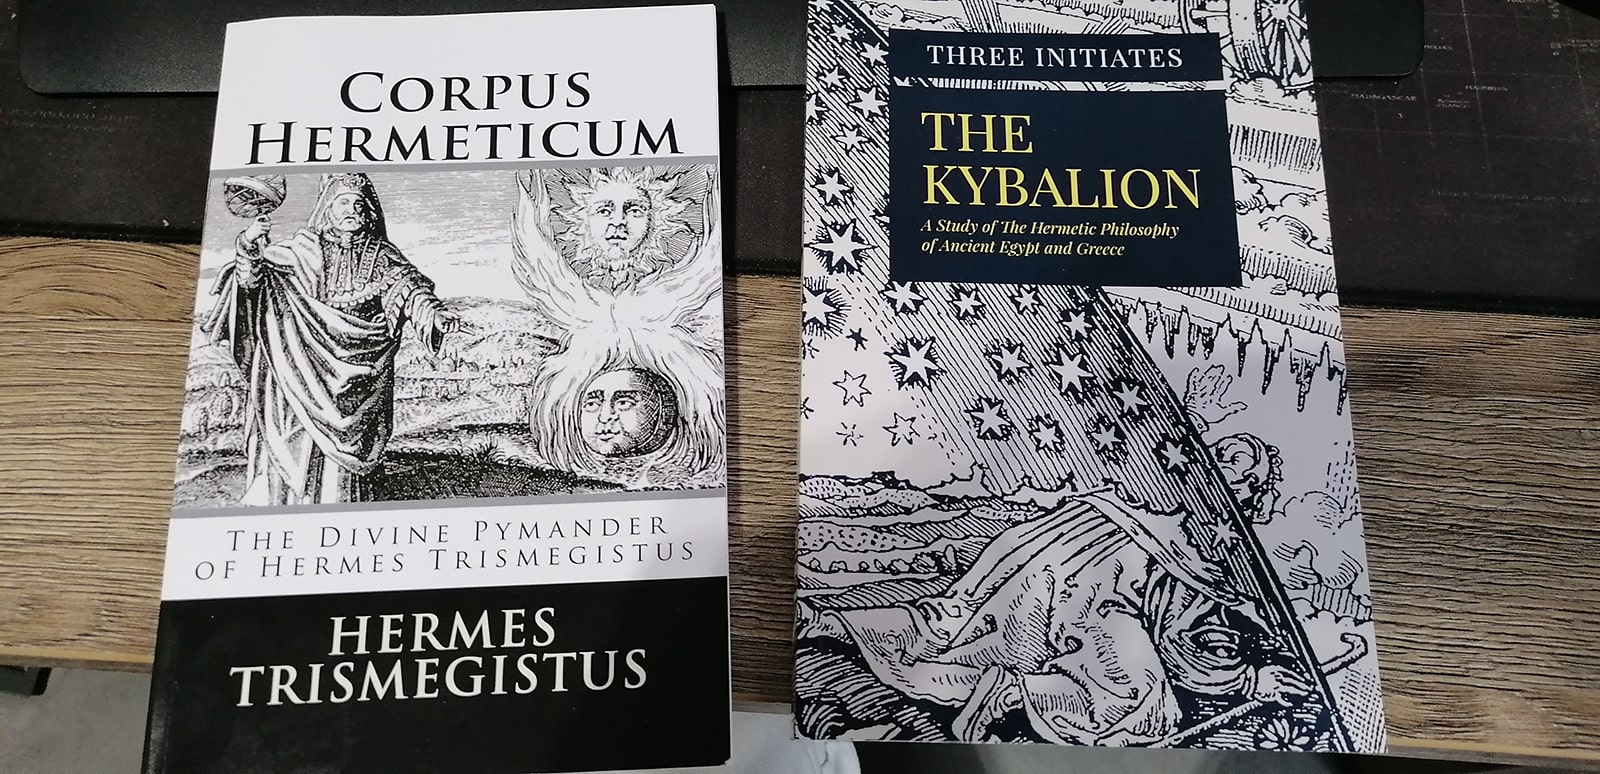 the kybalion and corpus hermeticum books